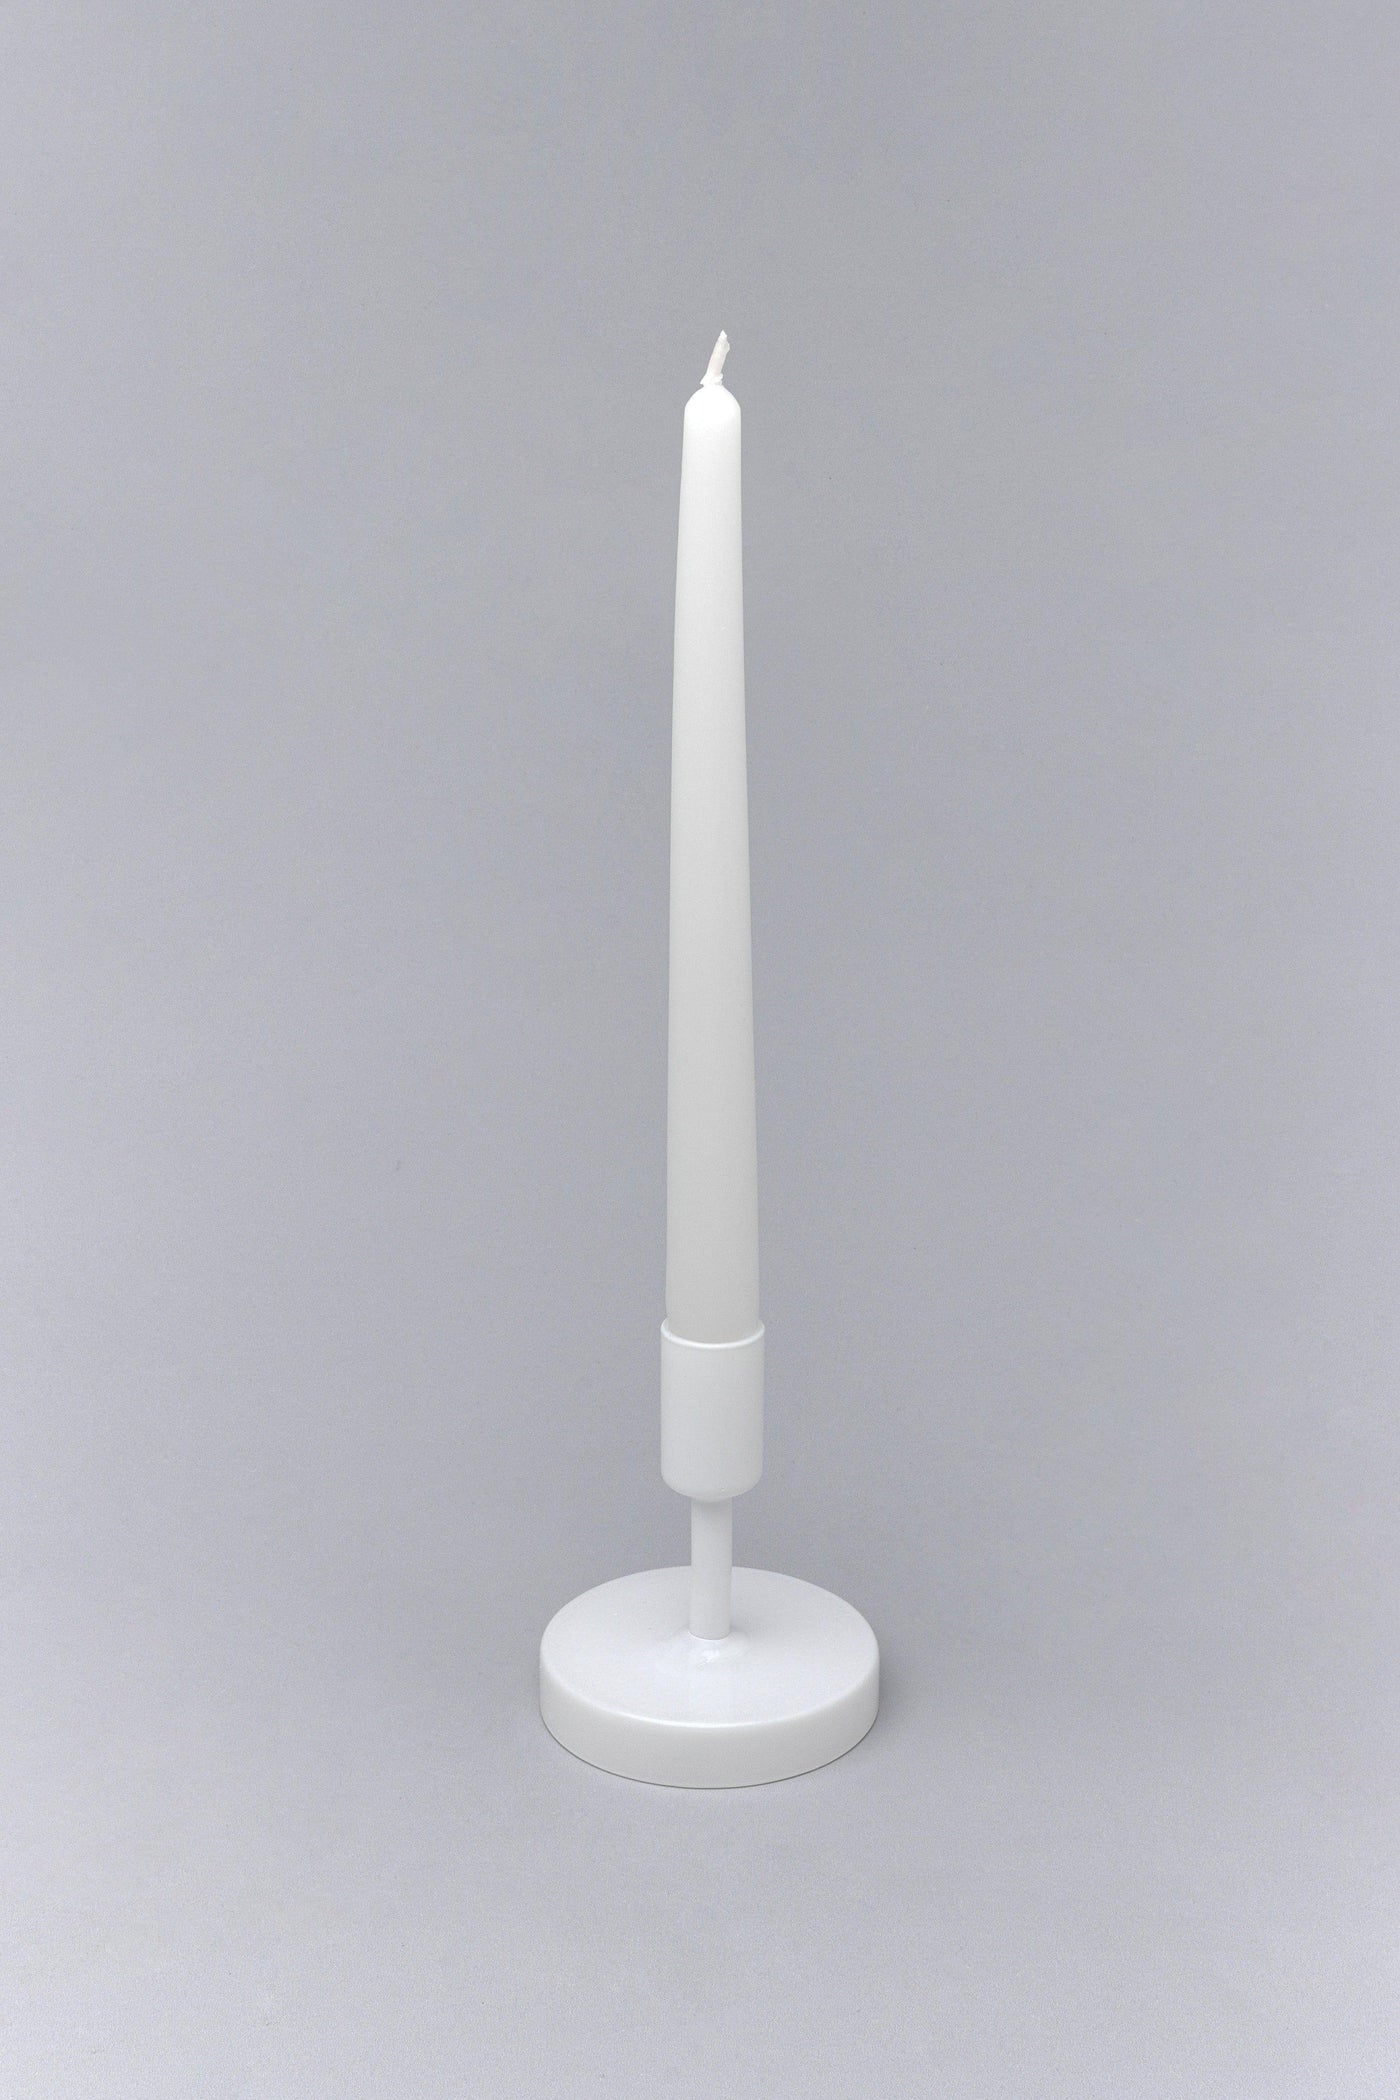 Gdecorstore Candles & Candle Holders Pack Of 10 or 20 Coraline Tall Candlesticks White Matt White Dinner Candles